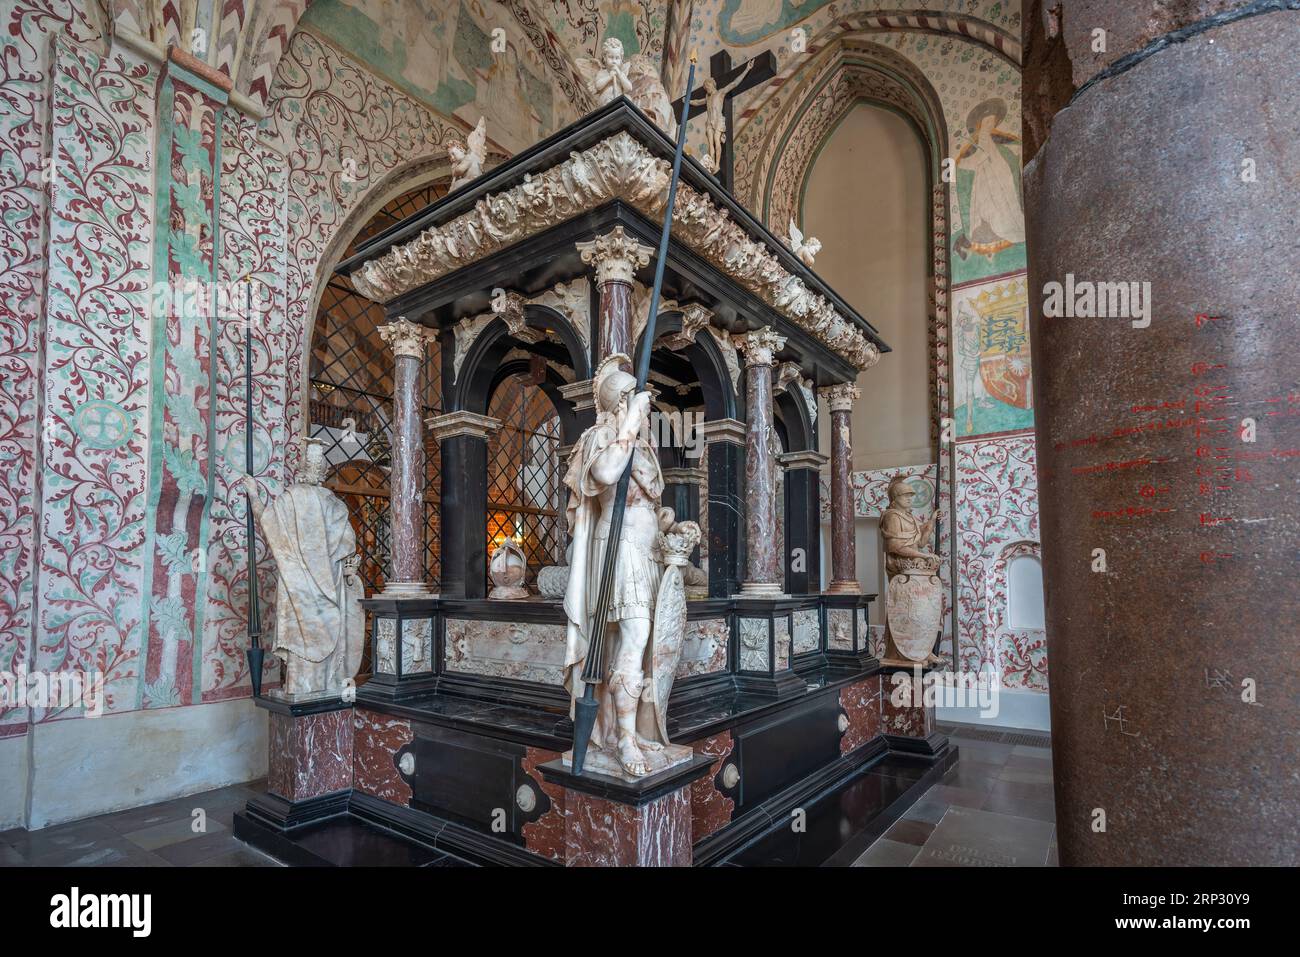 Christian III Tomb - Chapel of the Magi at Roskilde Cathedral - Roskilde, Denmark Stock Photo